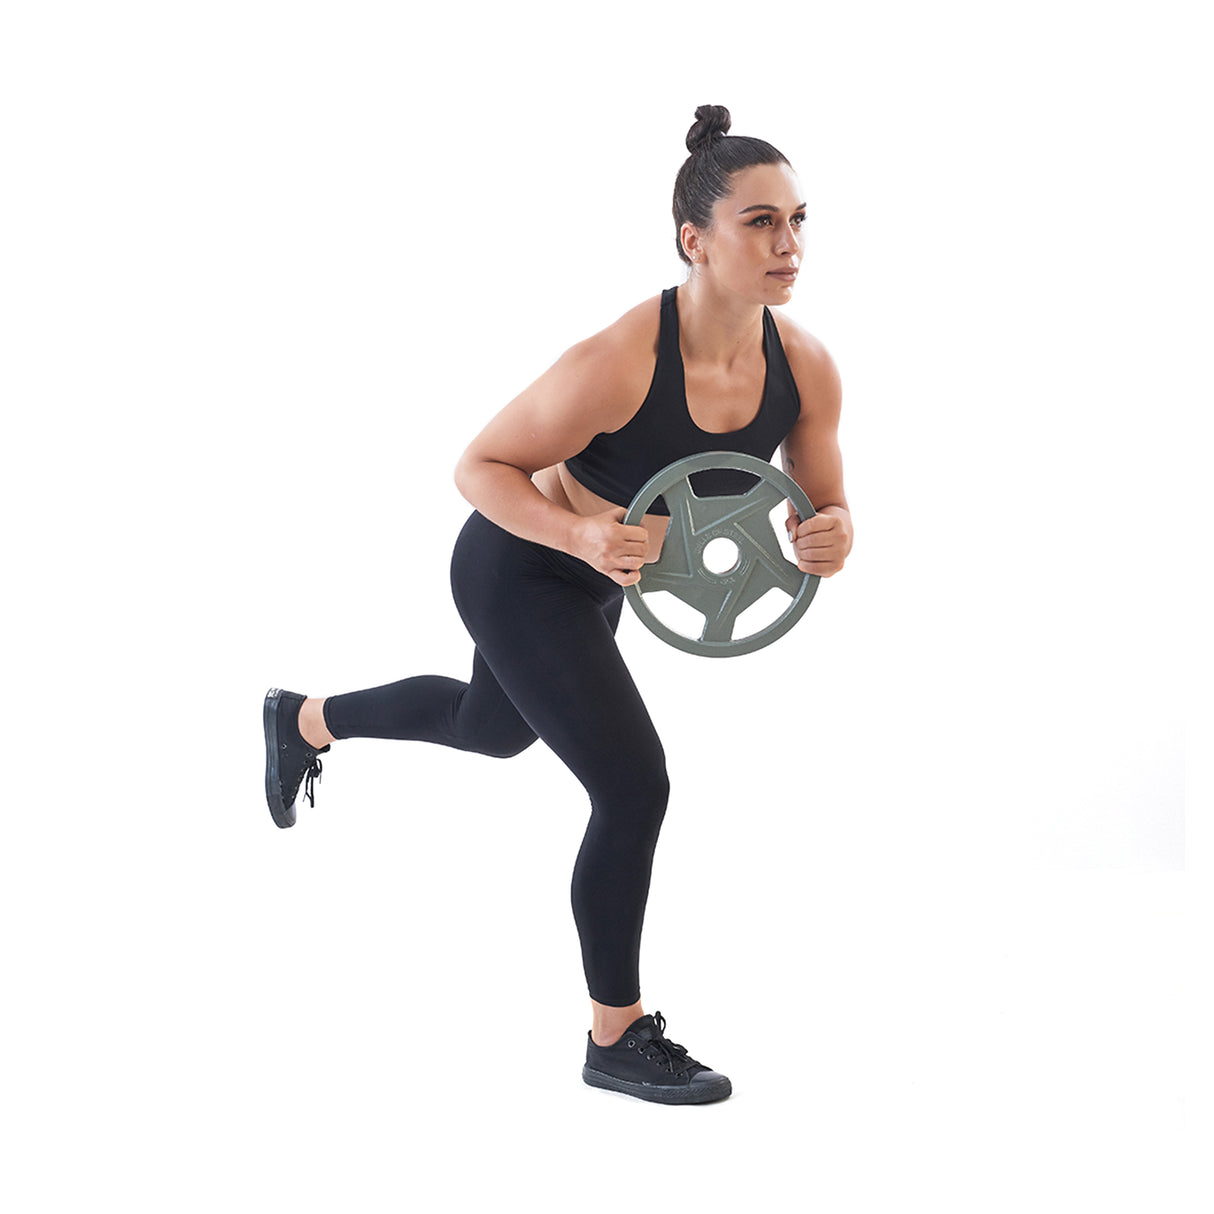 Female athlete doing lunges with Gray Mighty Grip Olympic Weight Plates